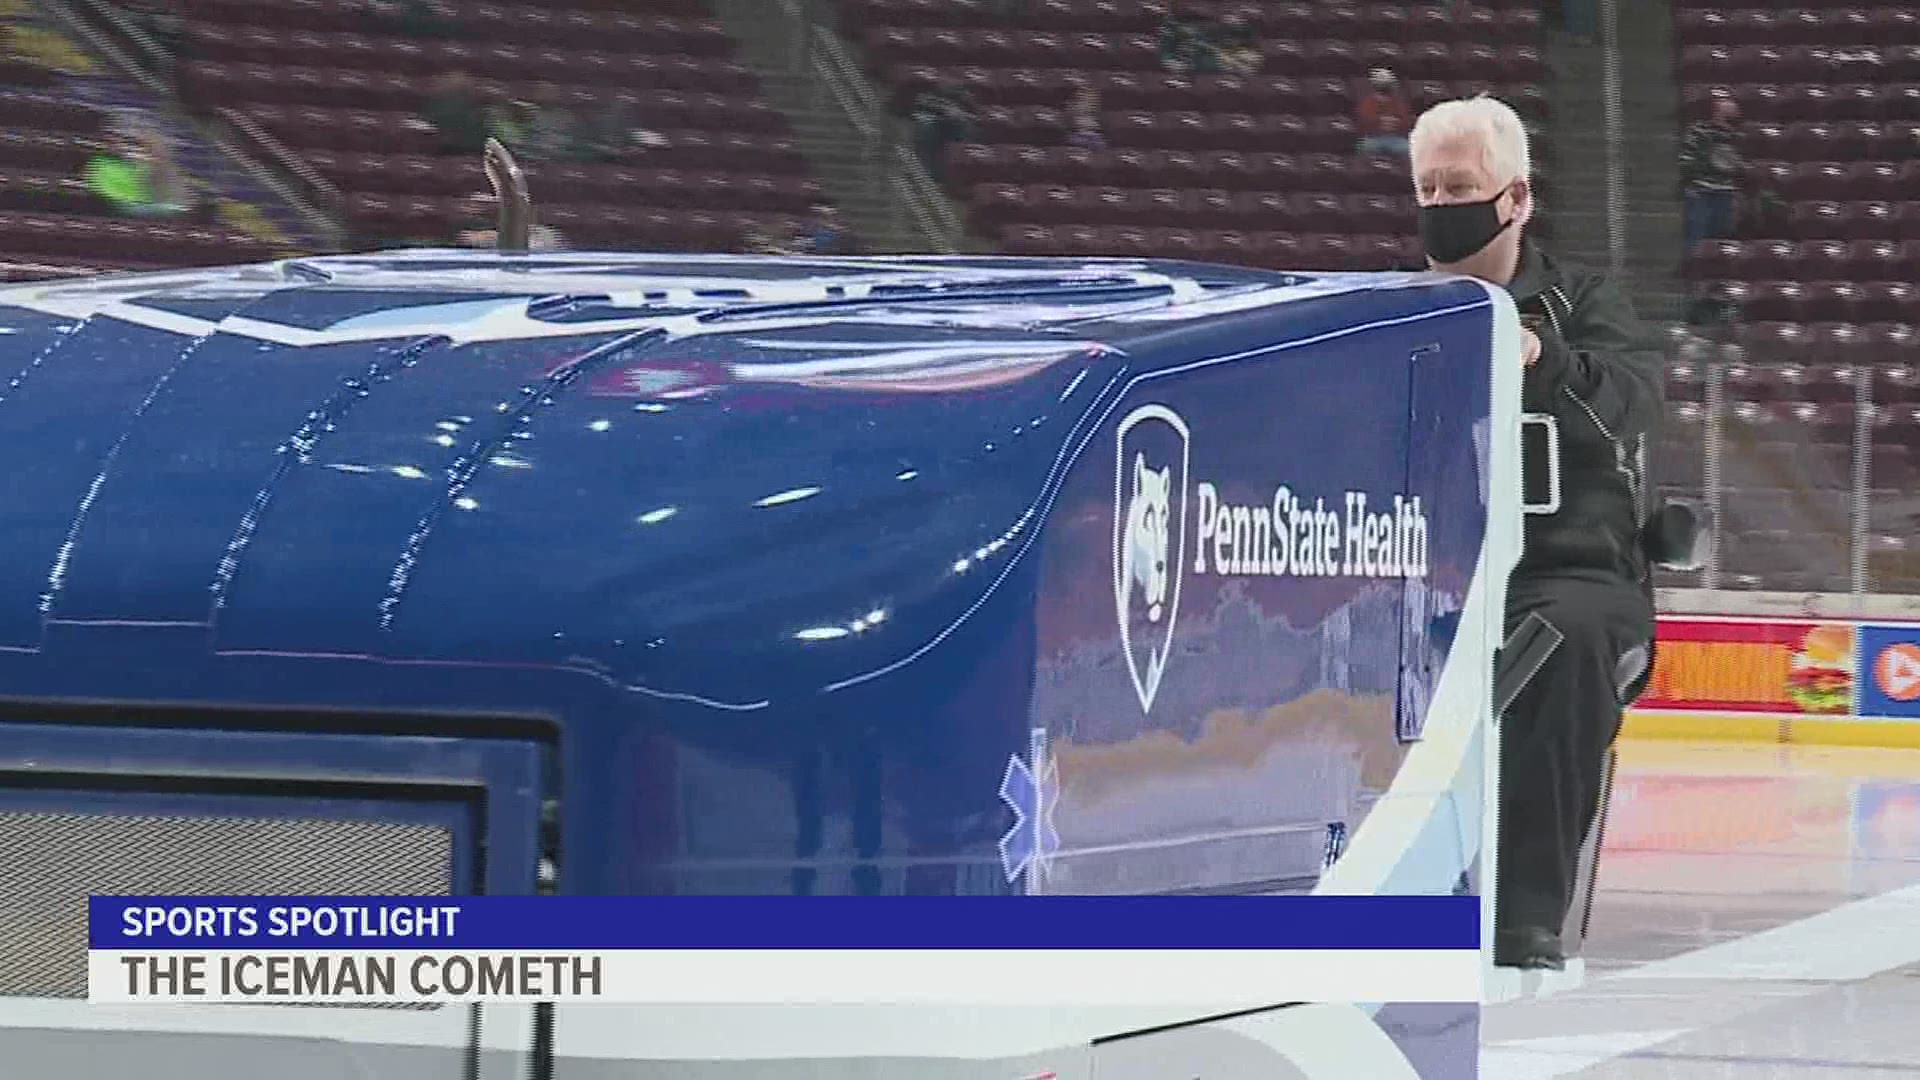 He's been recognized in Hawaii and Disney World, all because he drives the zamboni (or ice resurfacer) for the Hershey Bears.